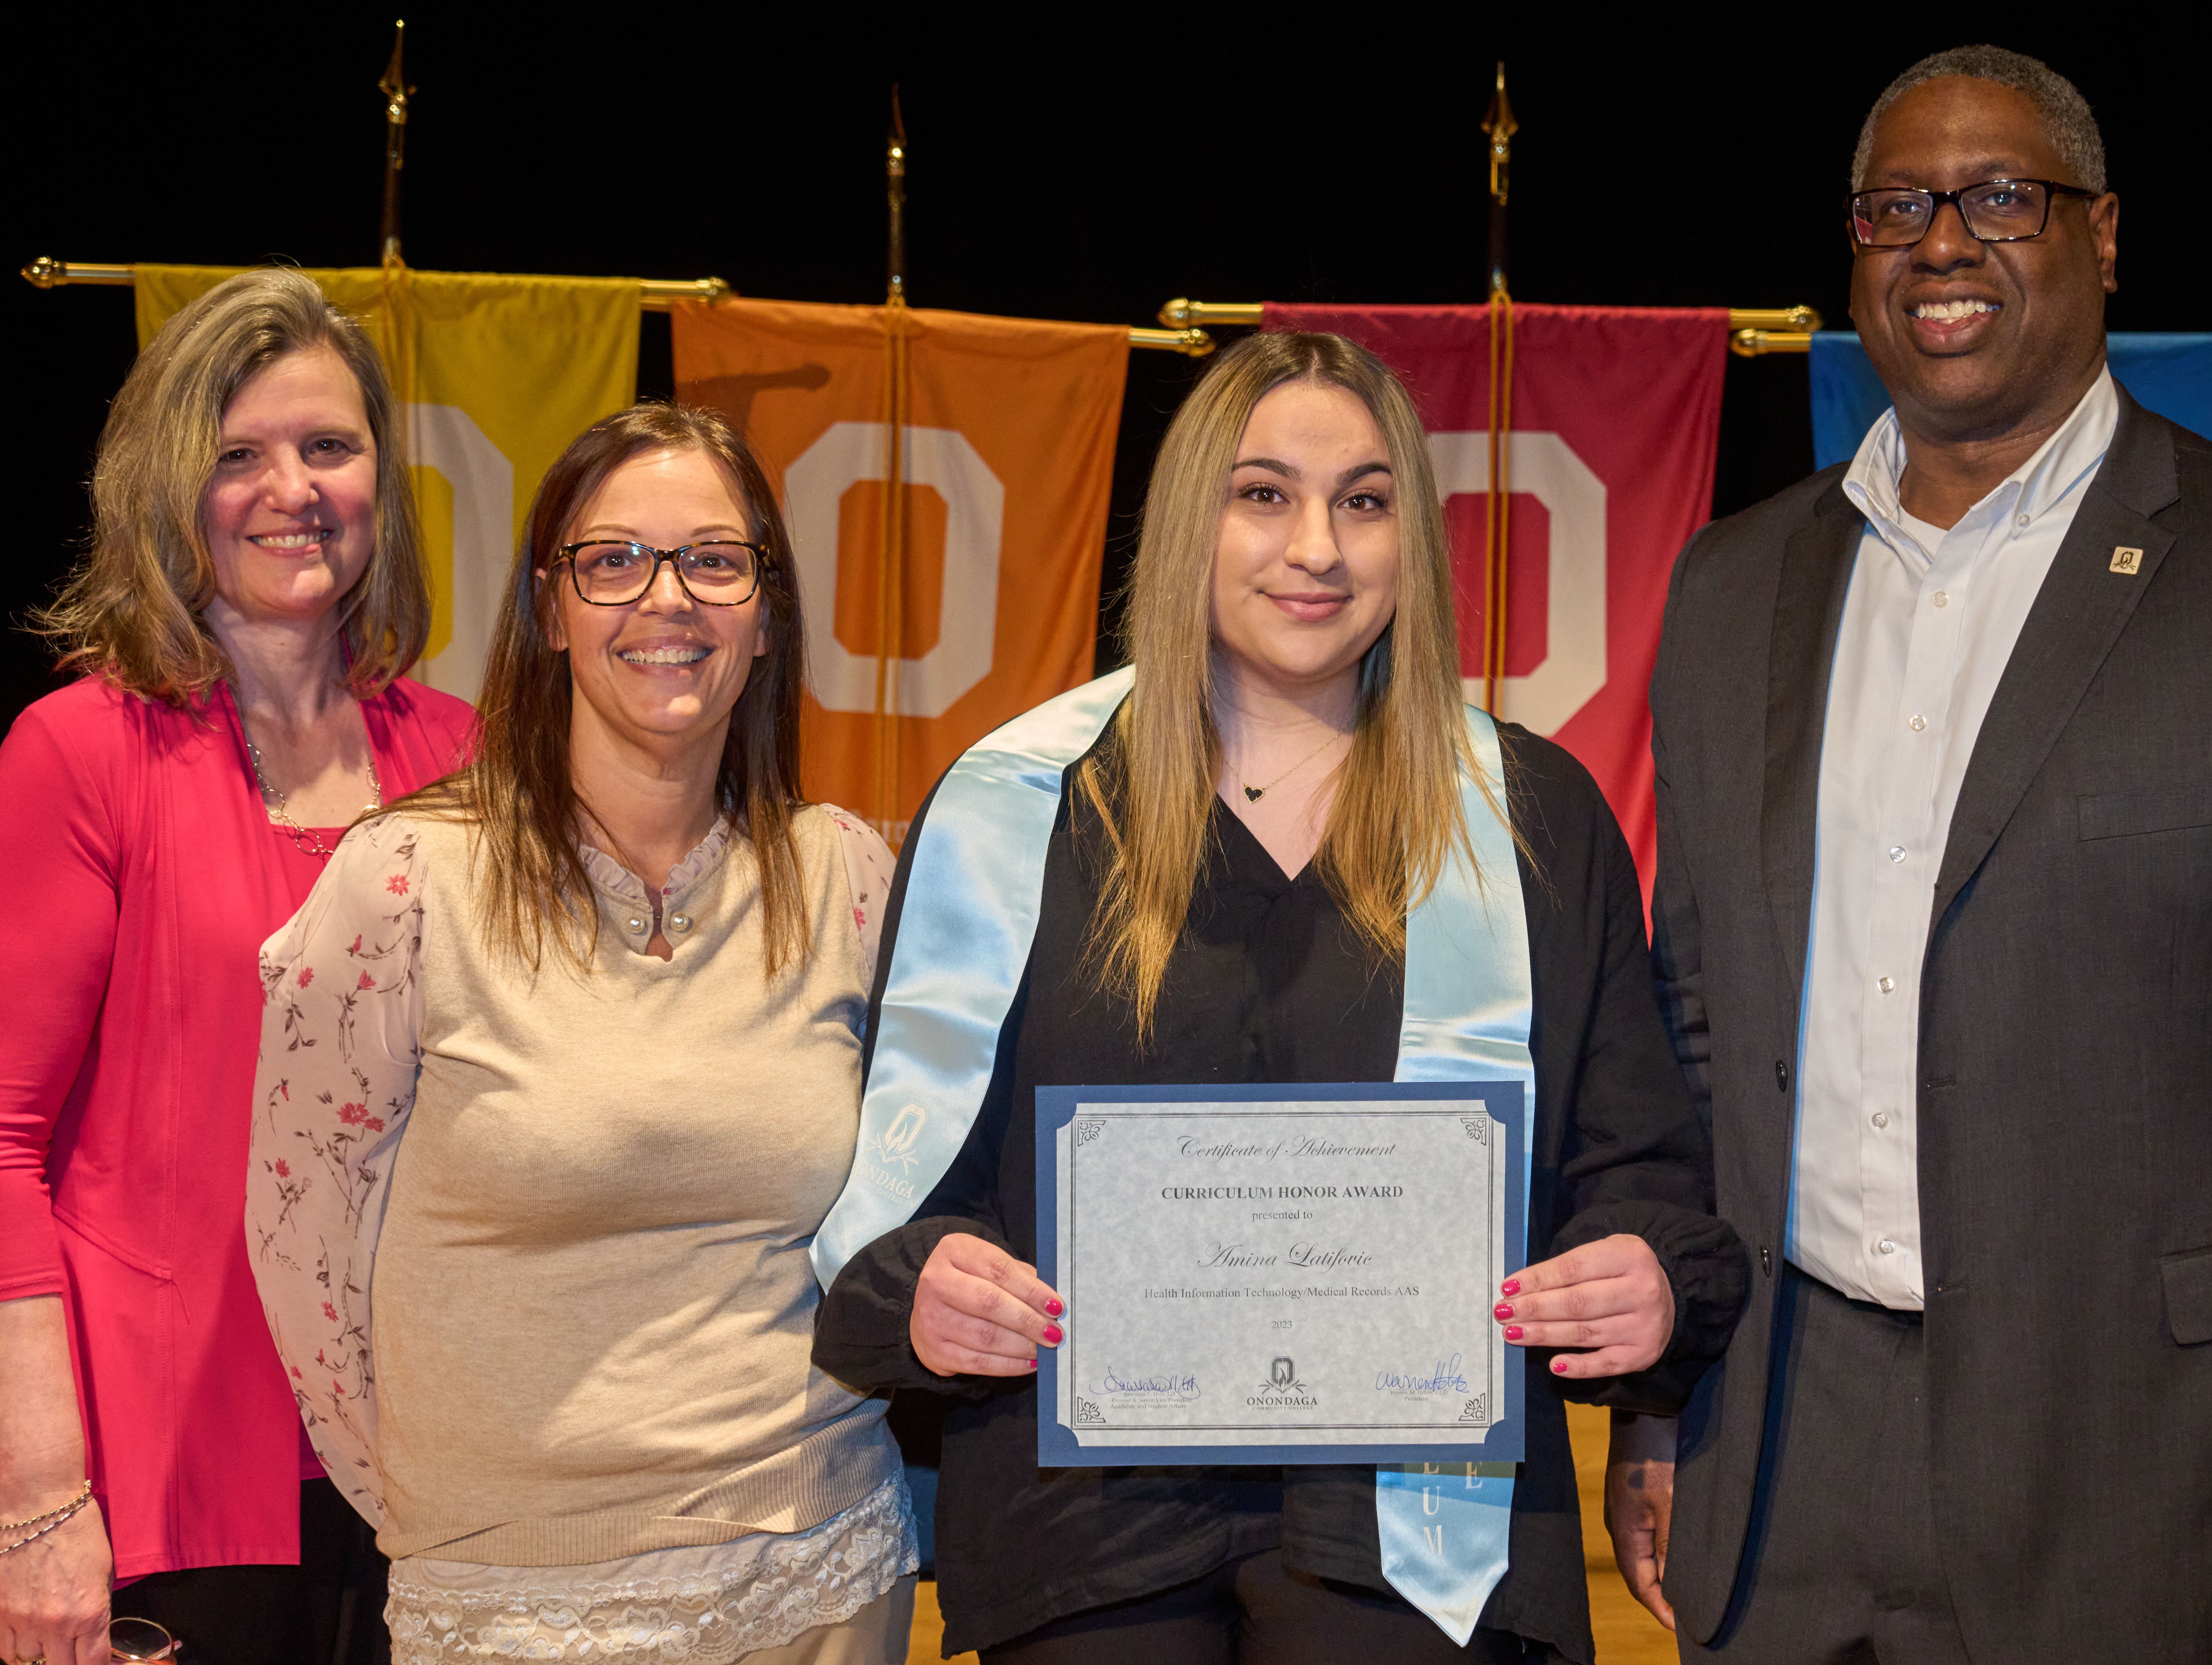 Amina Latifovic, Curriculum Honoree for Health Information Technology/Medical Records